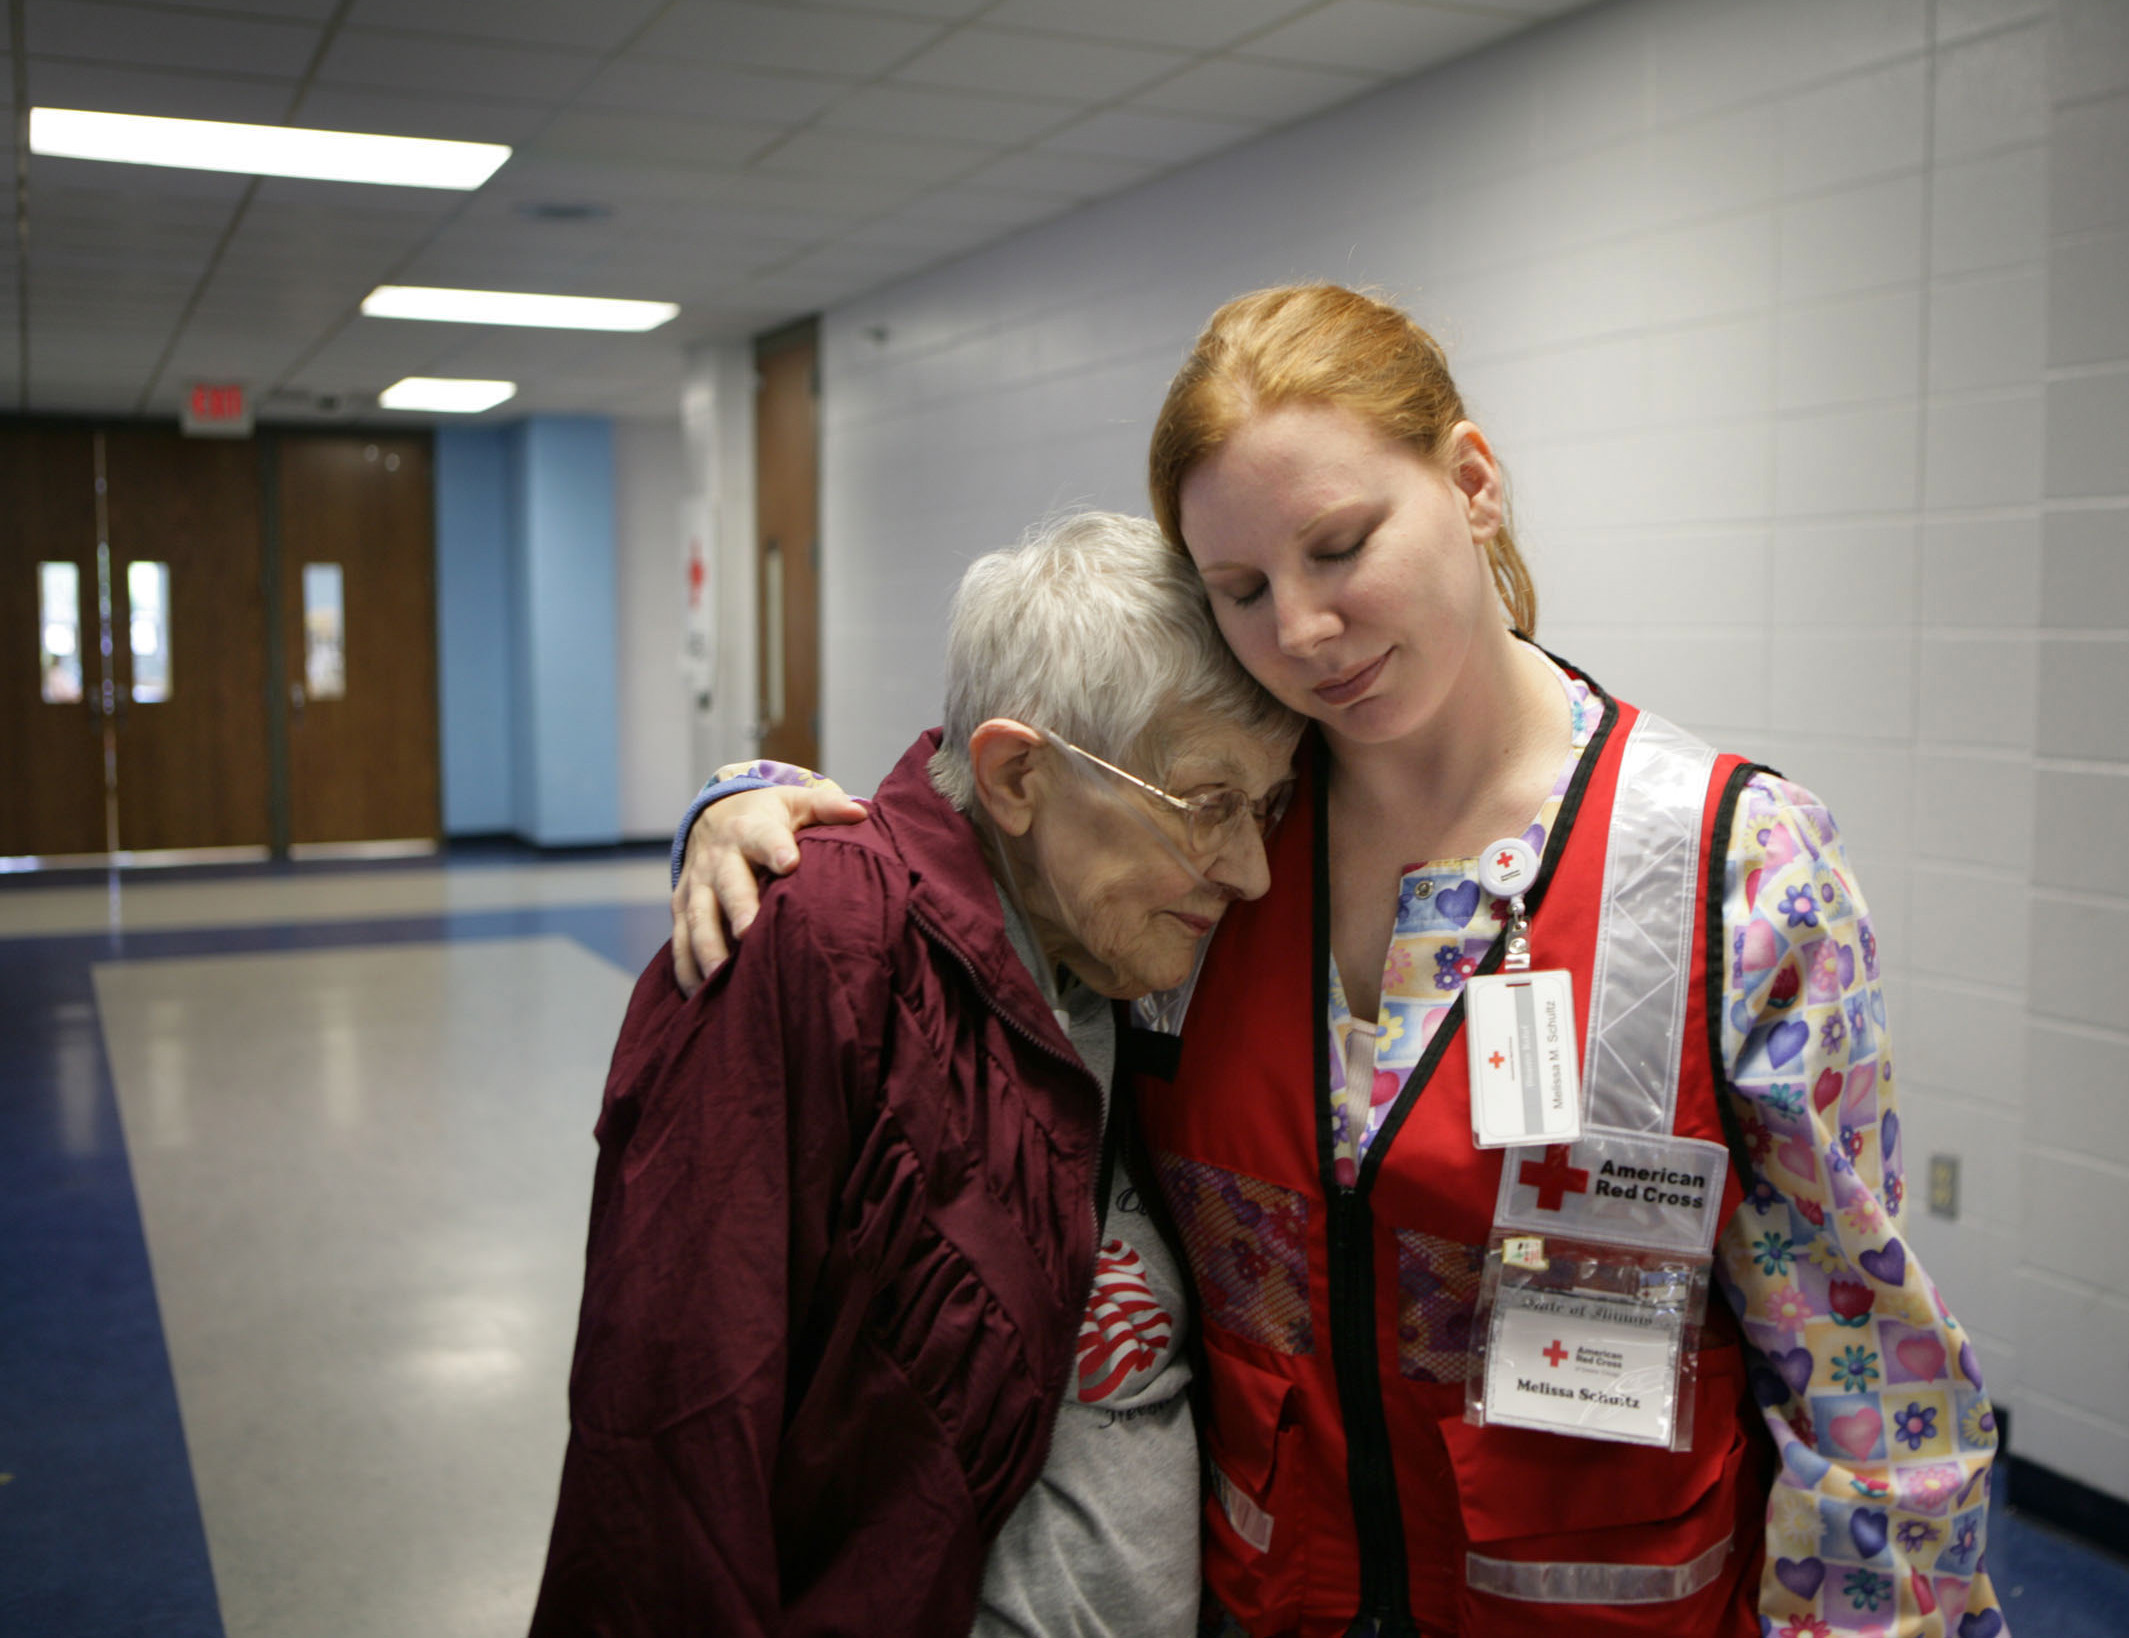 What it Means to be a Red Cross Nurse – Red Cross Central